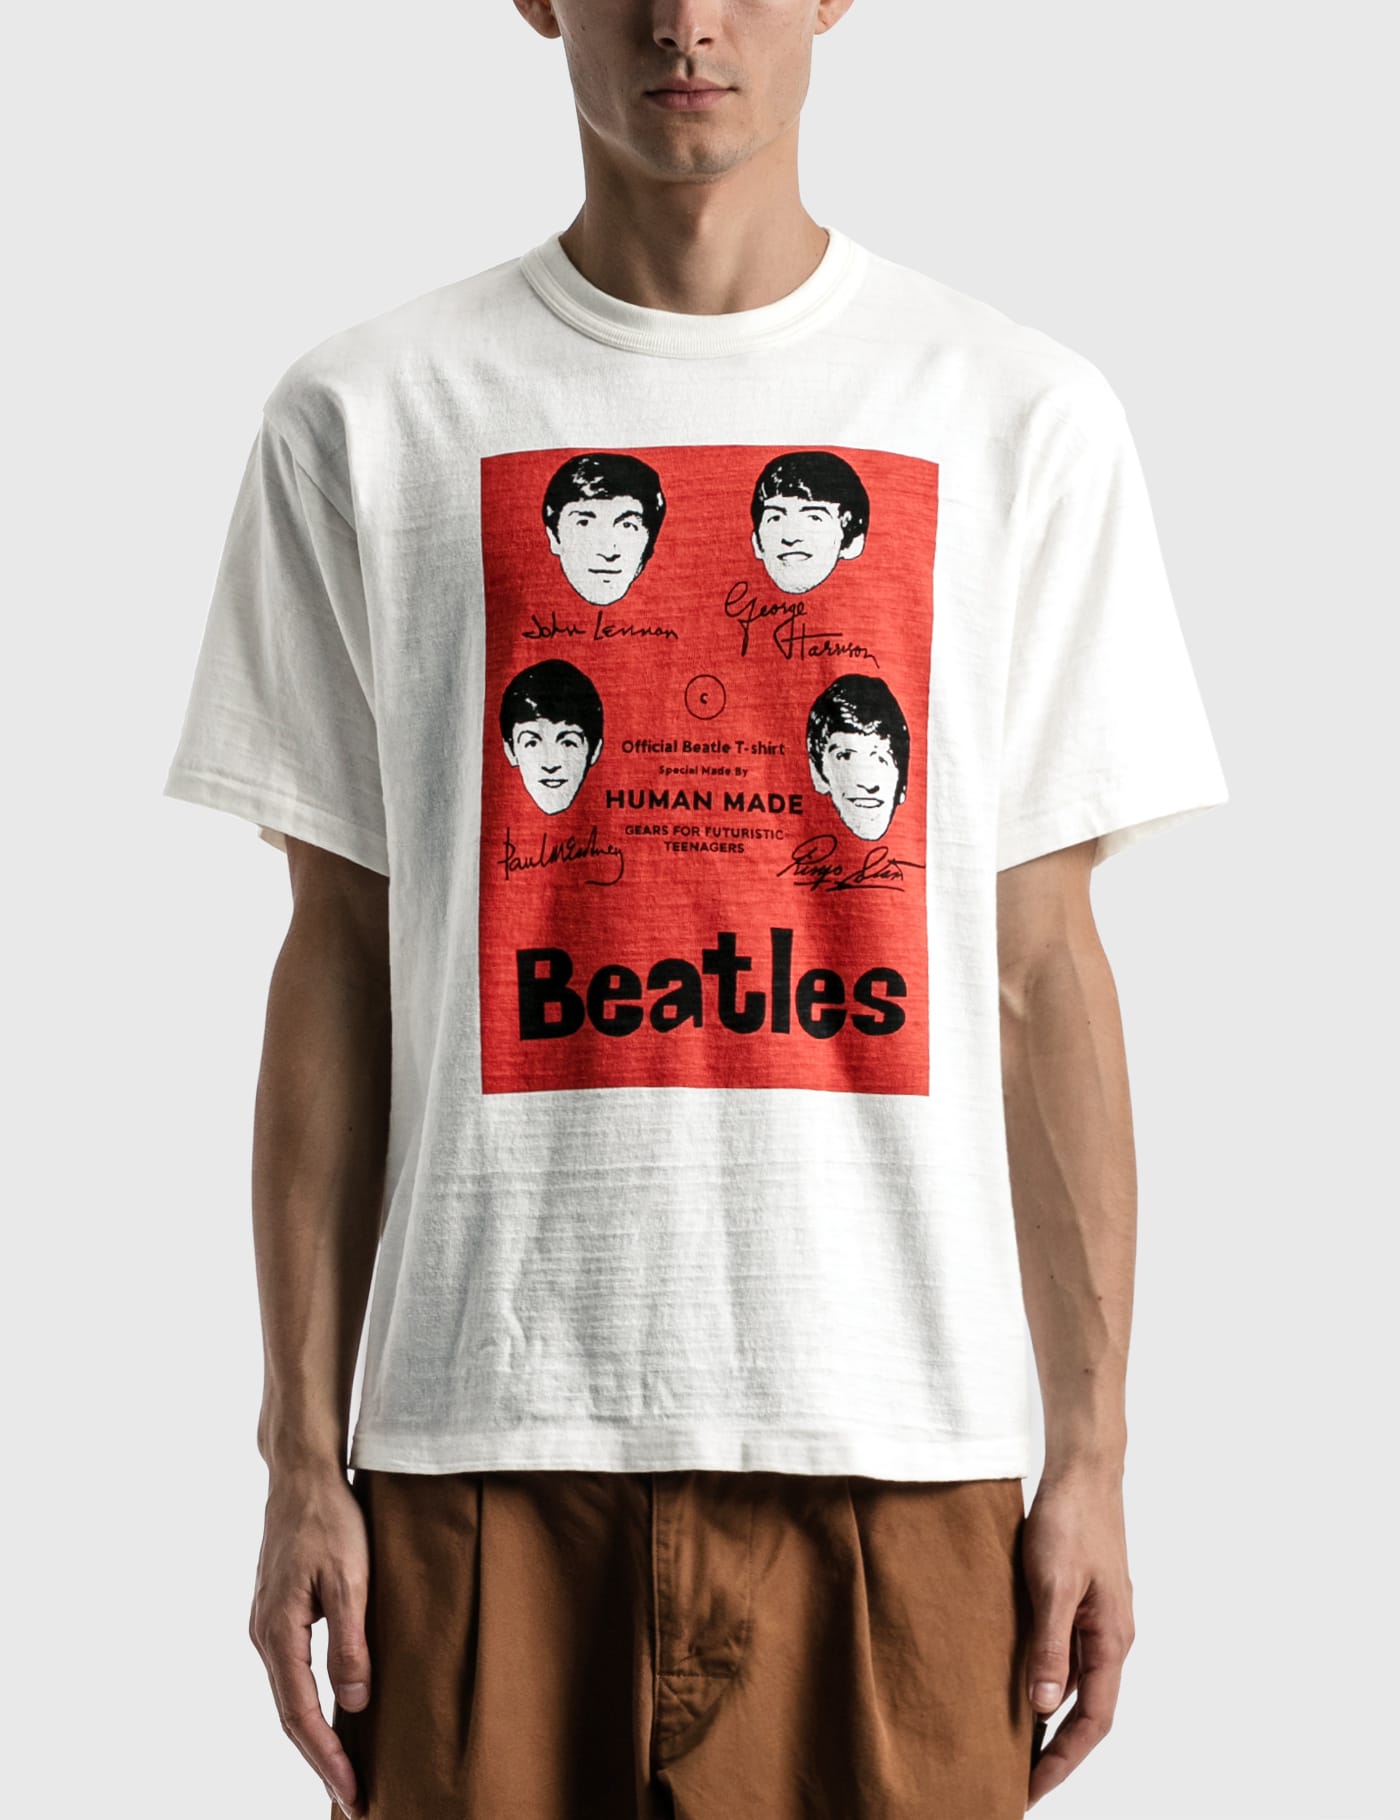 Human Made - Beatles T-shirt | HBX - Globally Curated Fashion and 